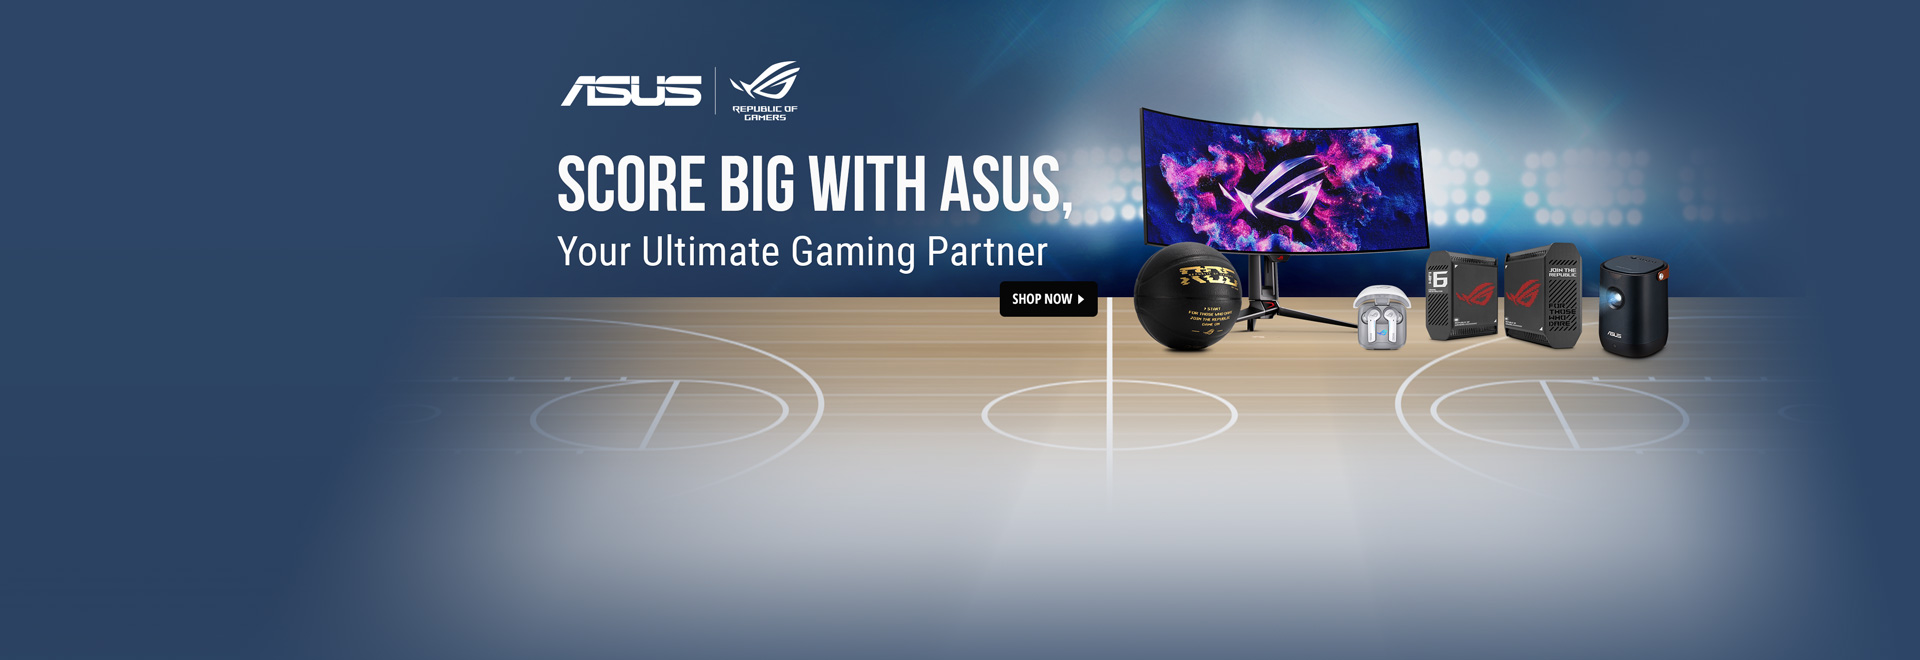  Score big with ASUS